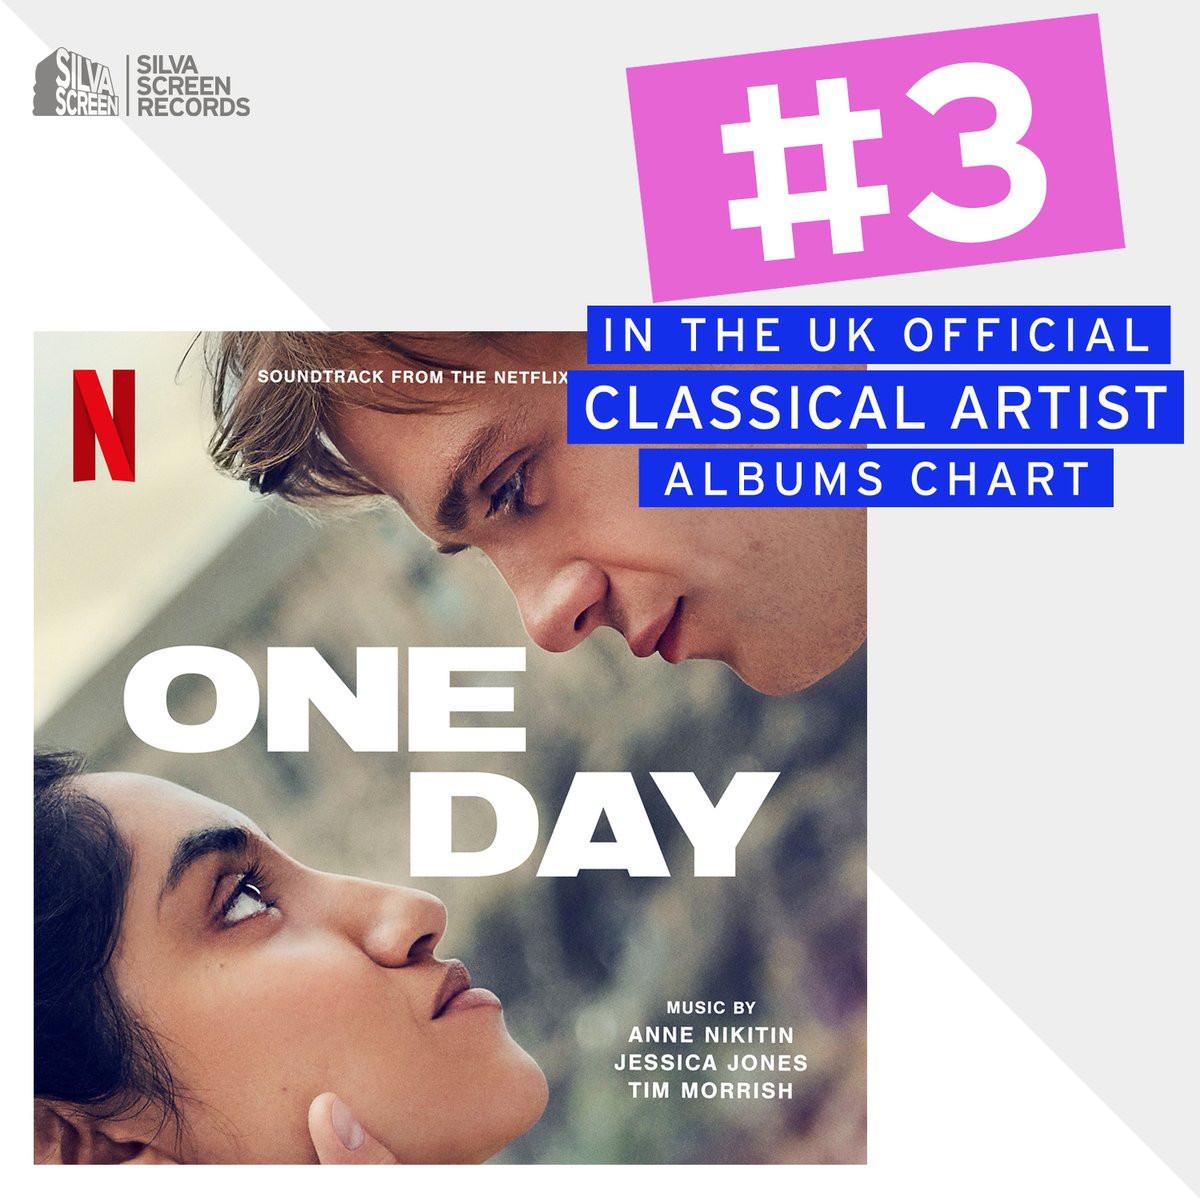 Congrats to @jessjones_music @MorrishTim and @annenikitin for the One Day soundtrack landing at no.3 in the UK Classical Artist album chart. Listen on digital streaming services now, vinyl is available to pre order. silvascreen.com/siled1758-one-…